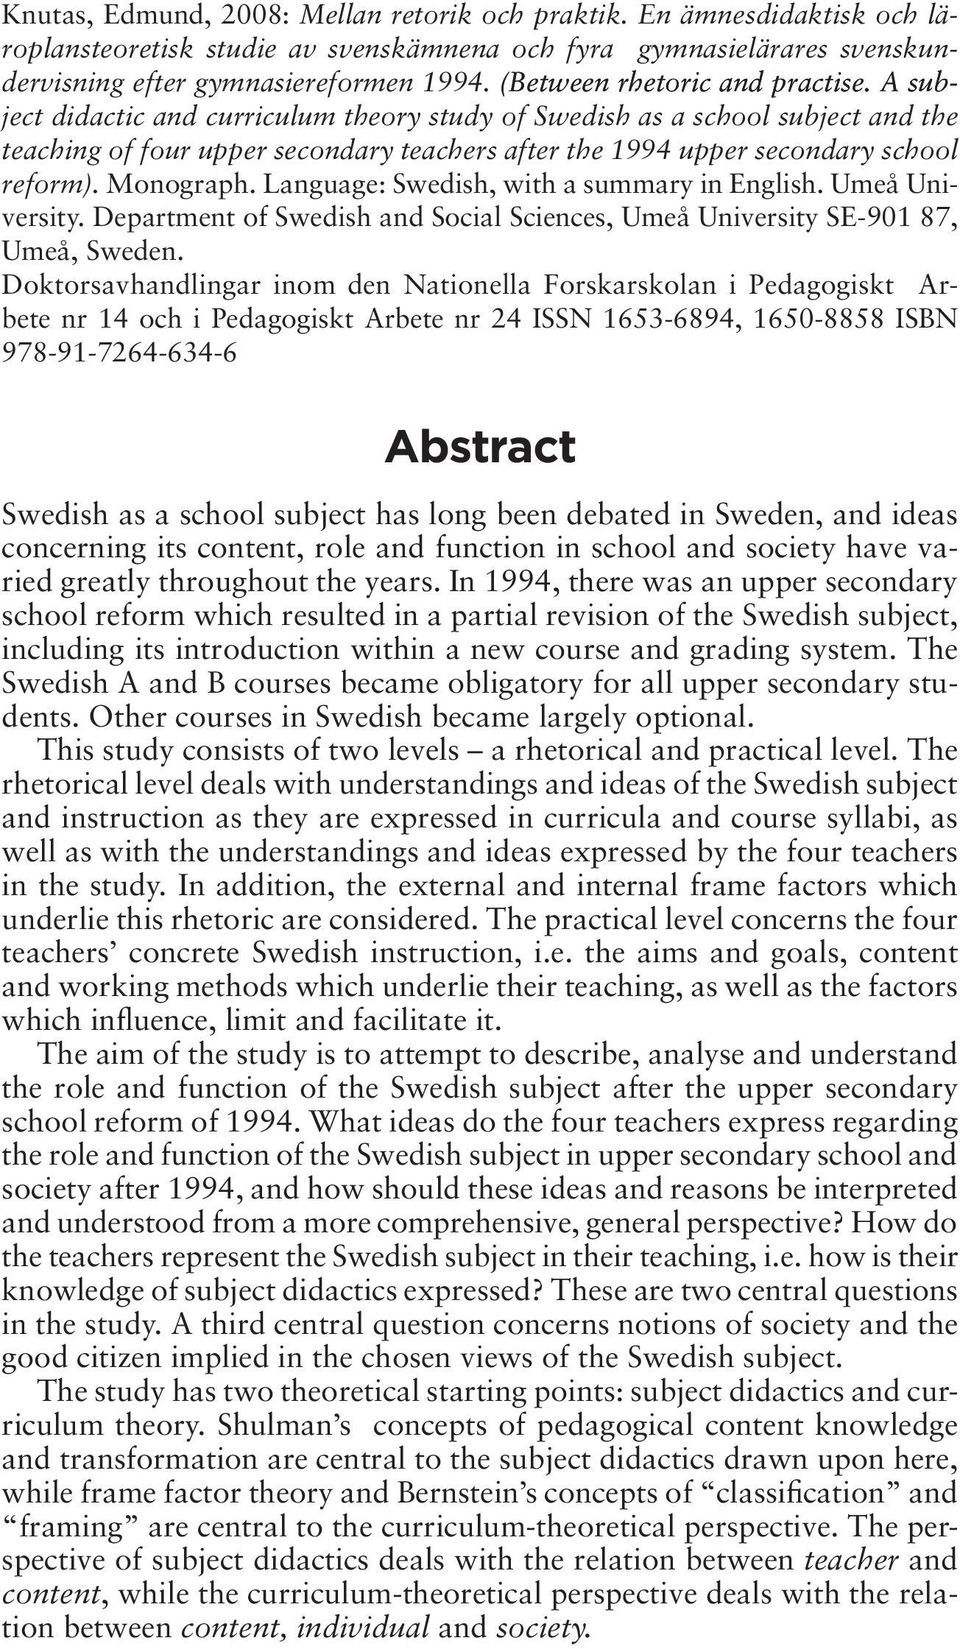 A sub su ject didactic and curriculum theory study of Swedish as a school subject and the teaching of four upper secondary teachers after the 1994 upper secondary school reform). Monograph.